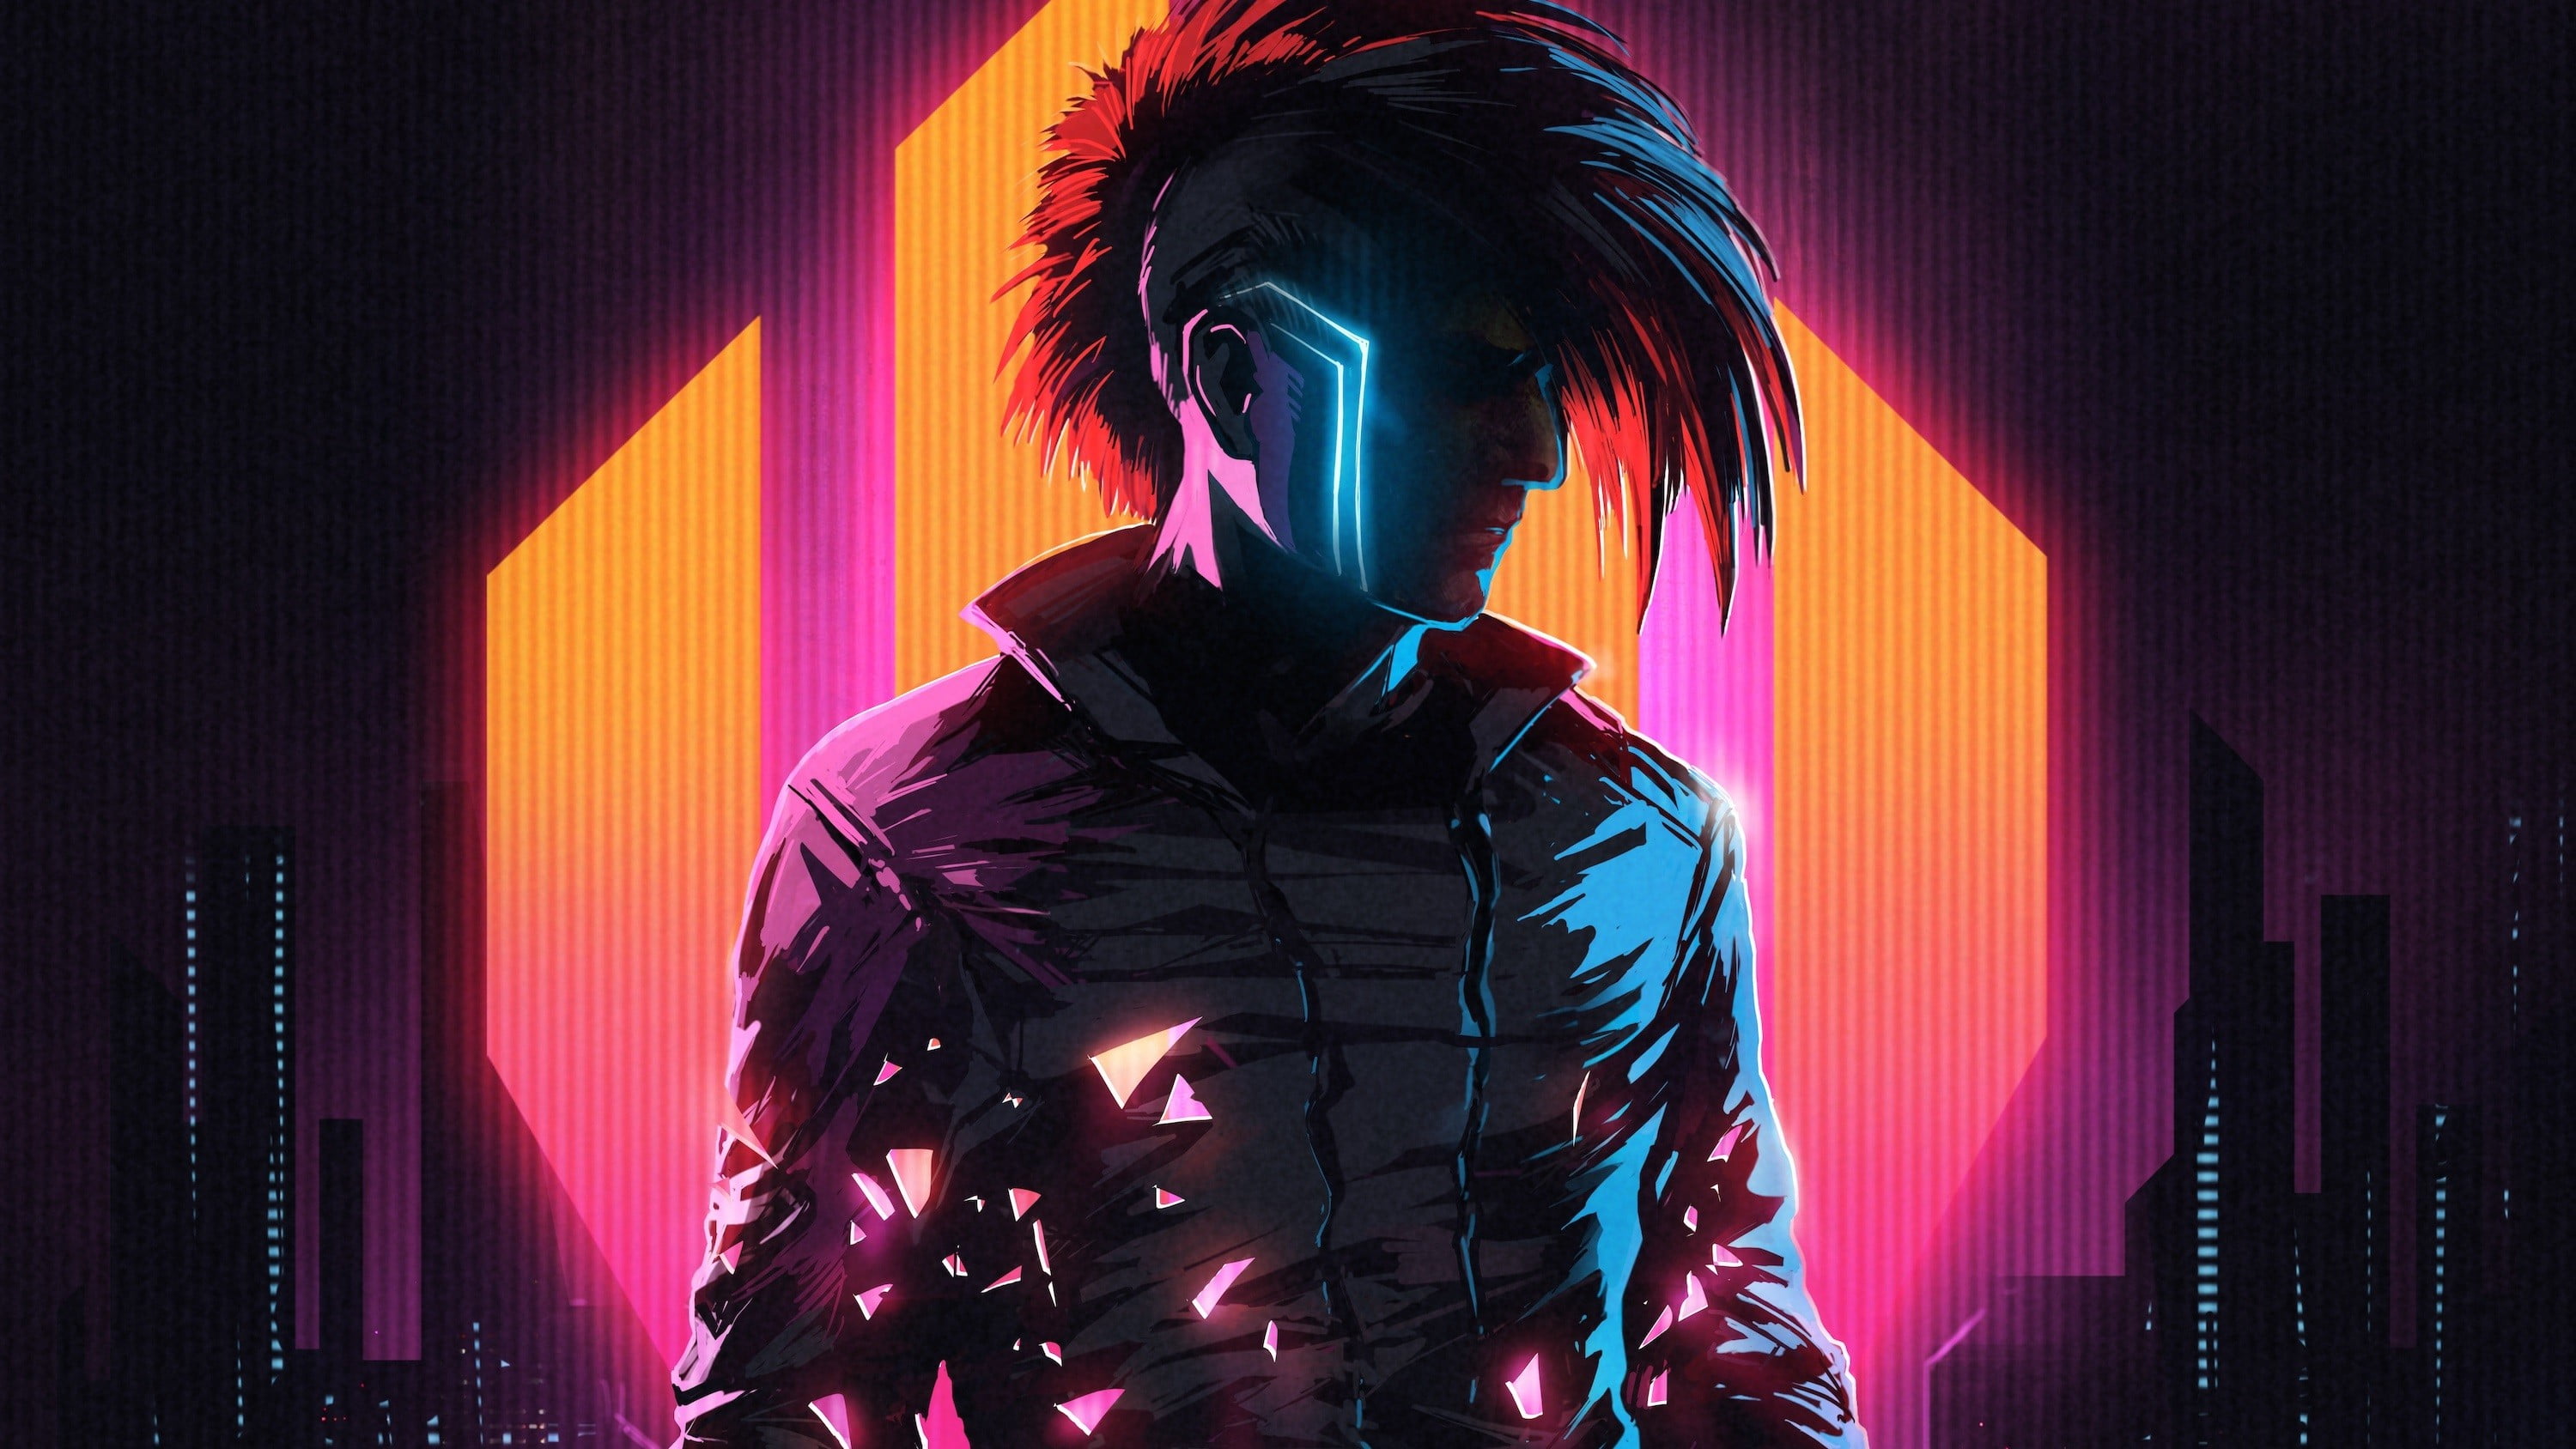 man wearing gray top illustration, silhouette of man with neon colors